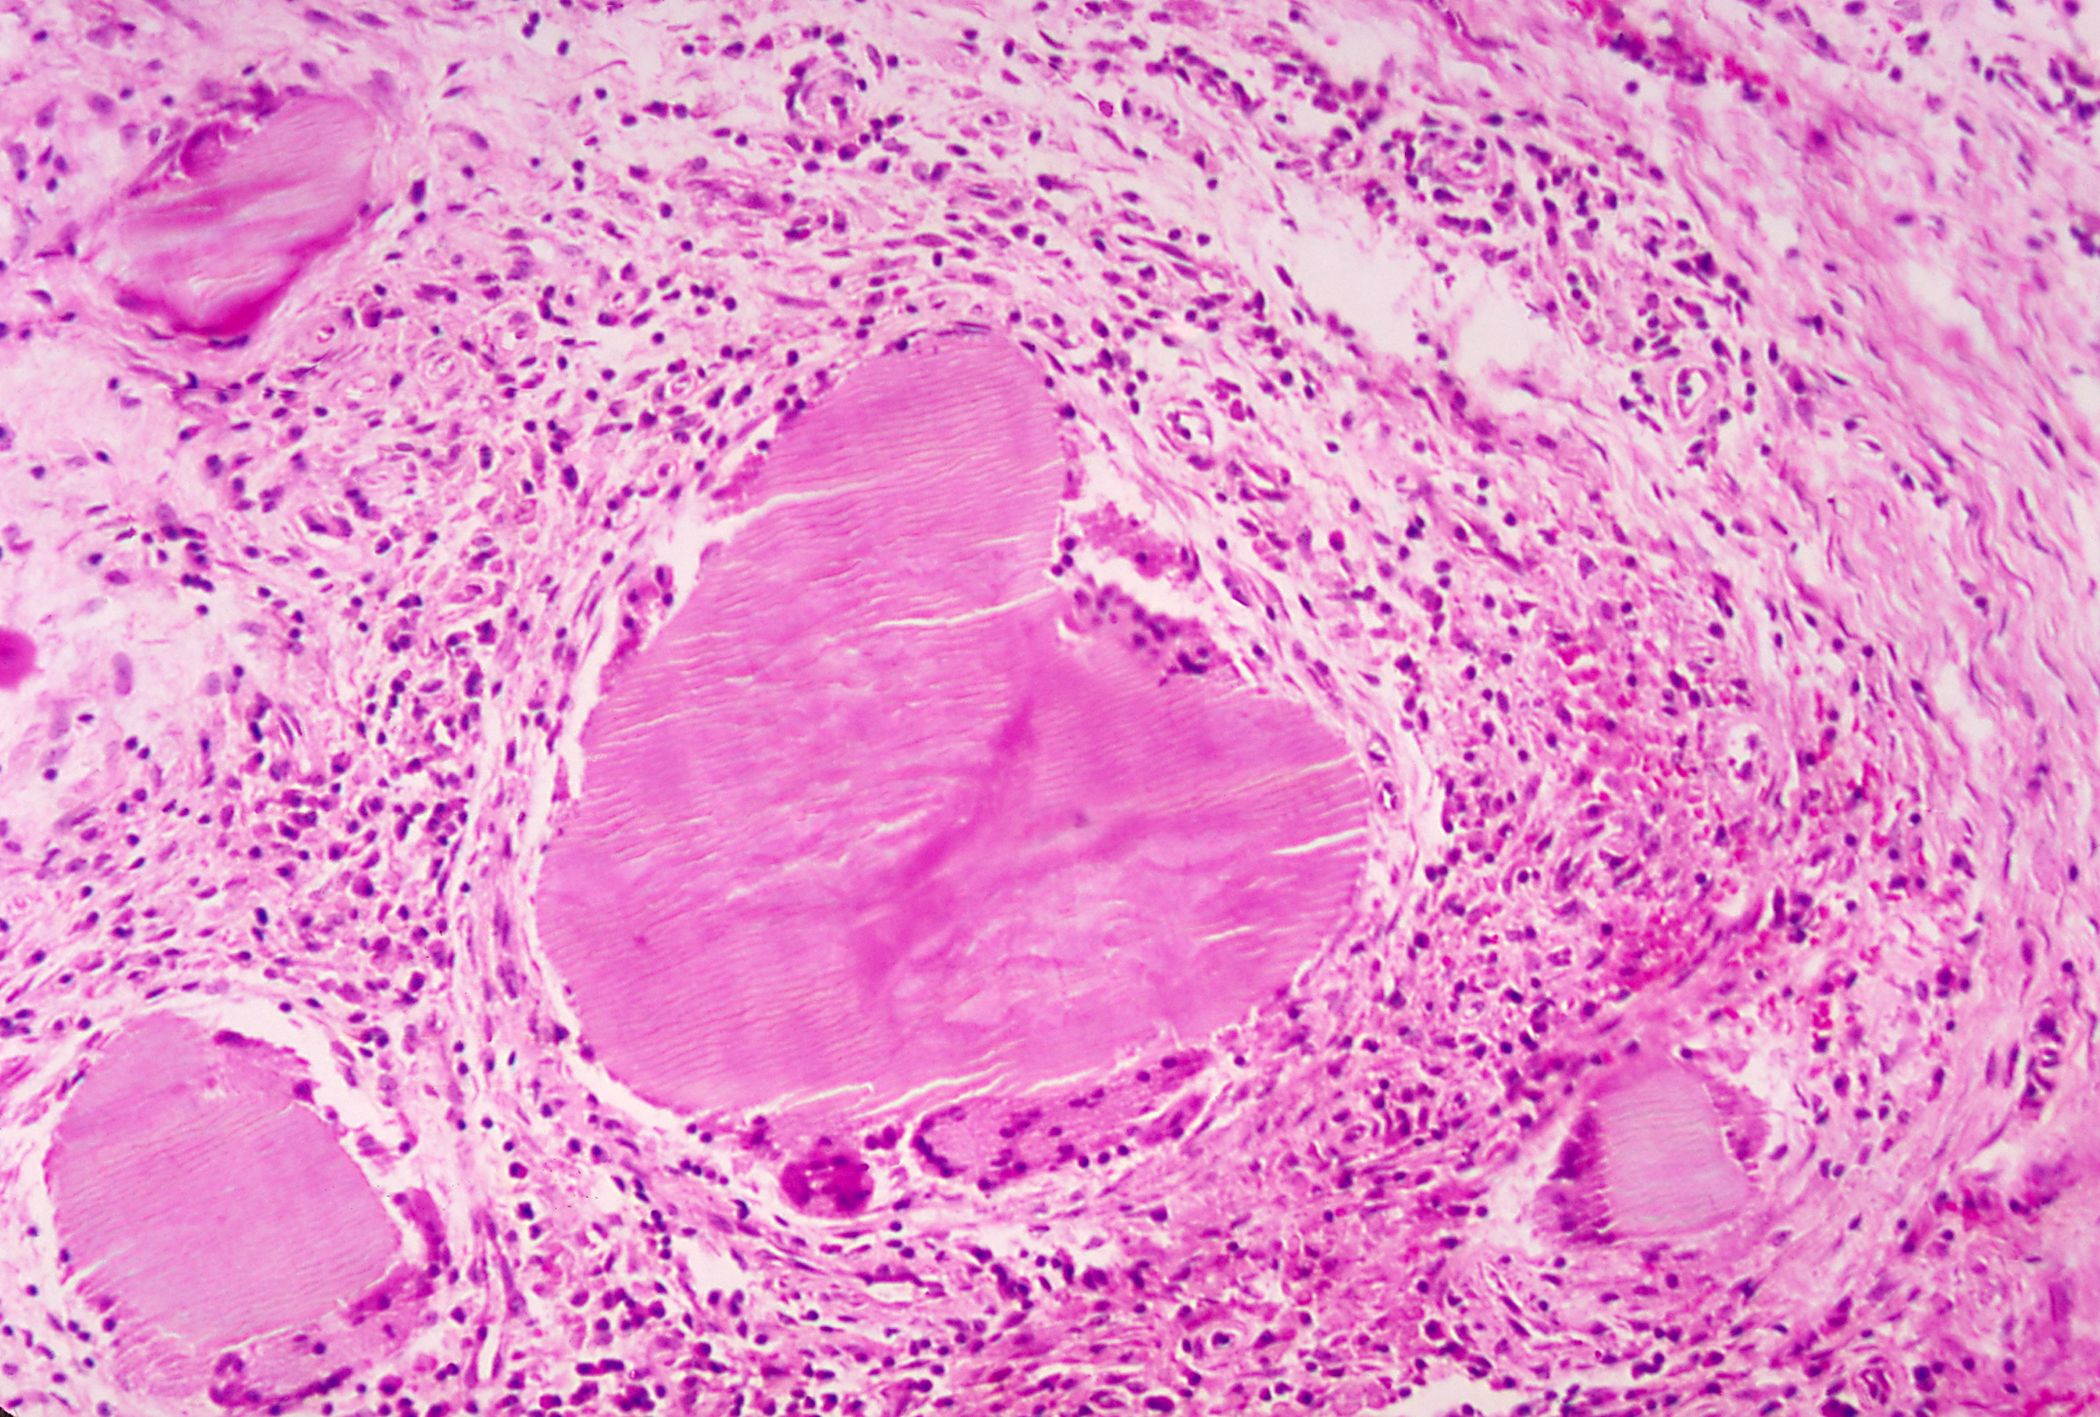 This photomicrograph of an unidentified tissue specimen was harvested from a patient, who had presented with a case of actinomycosis, caused by the Gram-positive, aerobic actinomycete, Streptomyces somaliensis